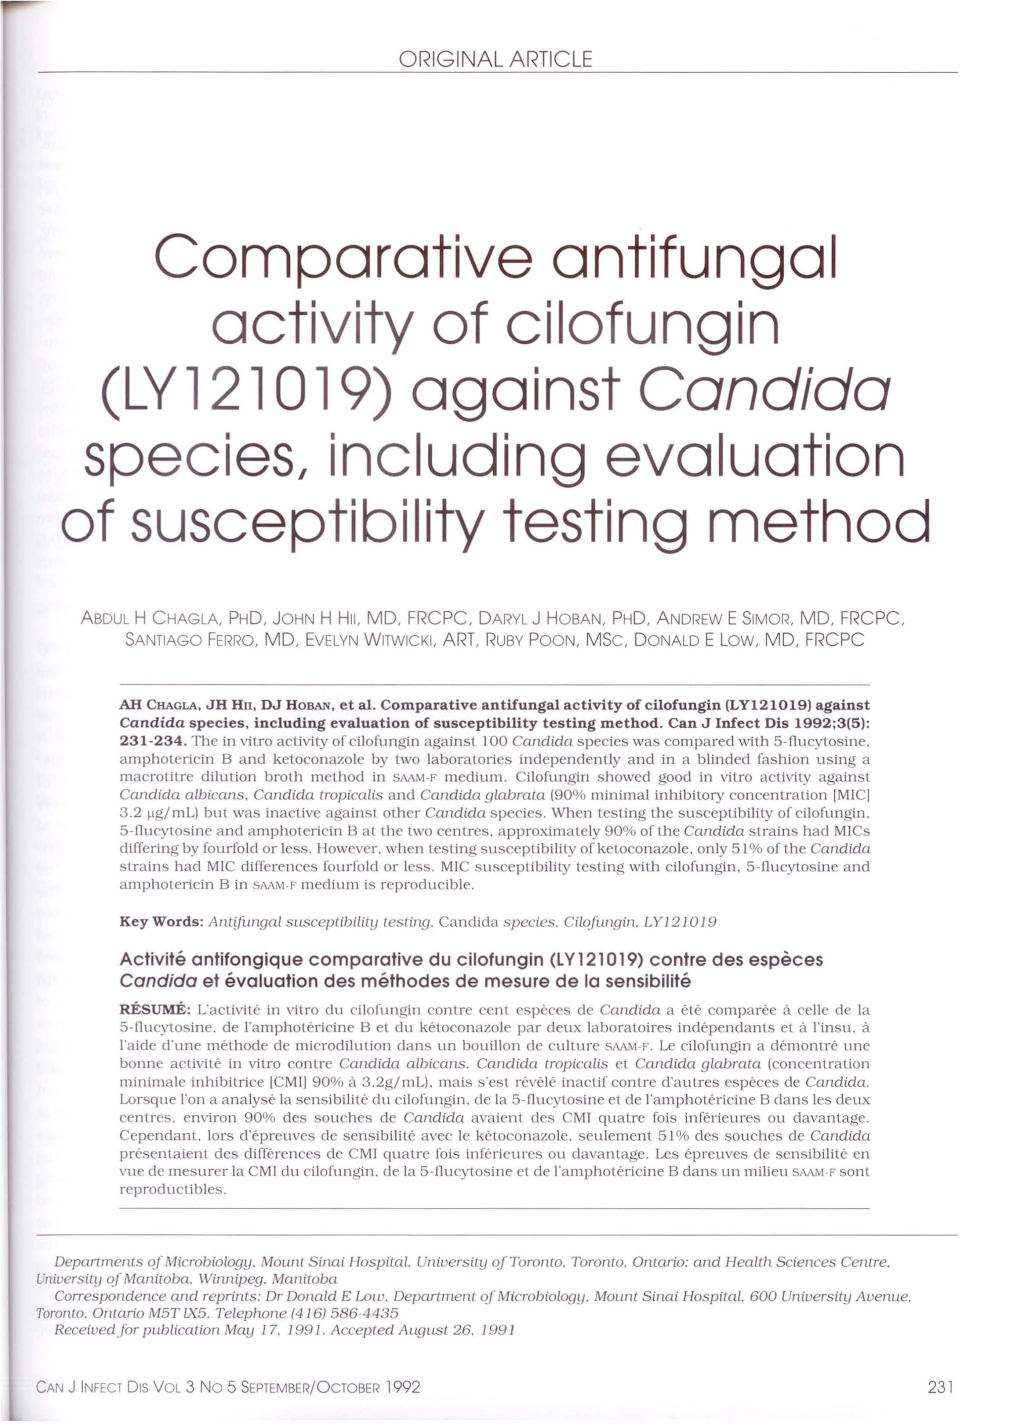 Comparative Antifungal Activity of Cilofungin (LV 121 0 19) Against Candida Species/ Including Evaluation of Susceptibility Testing Method